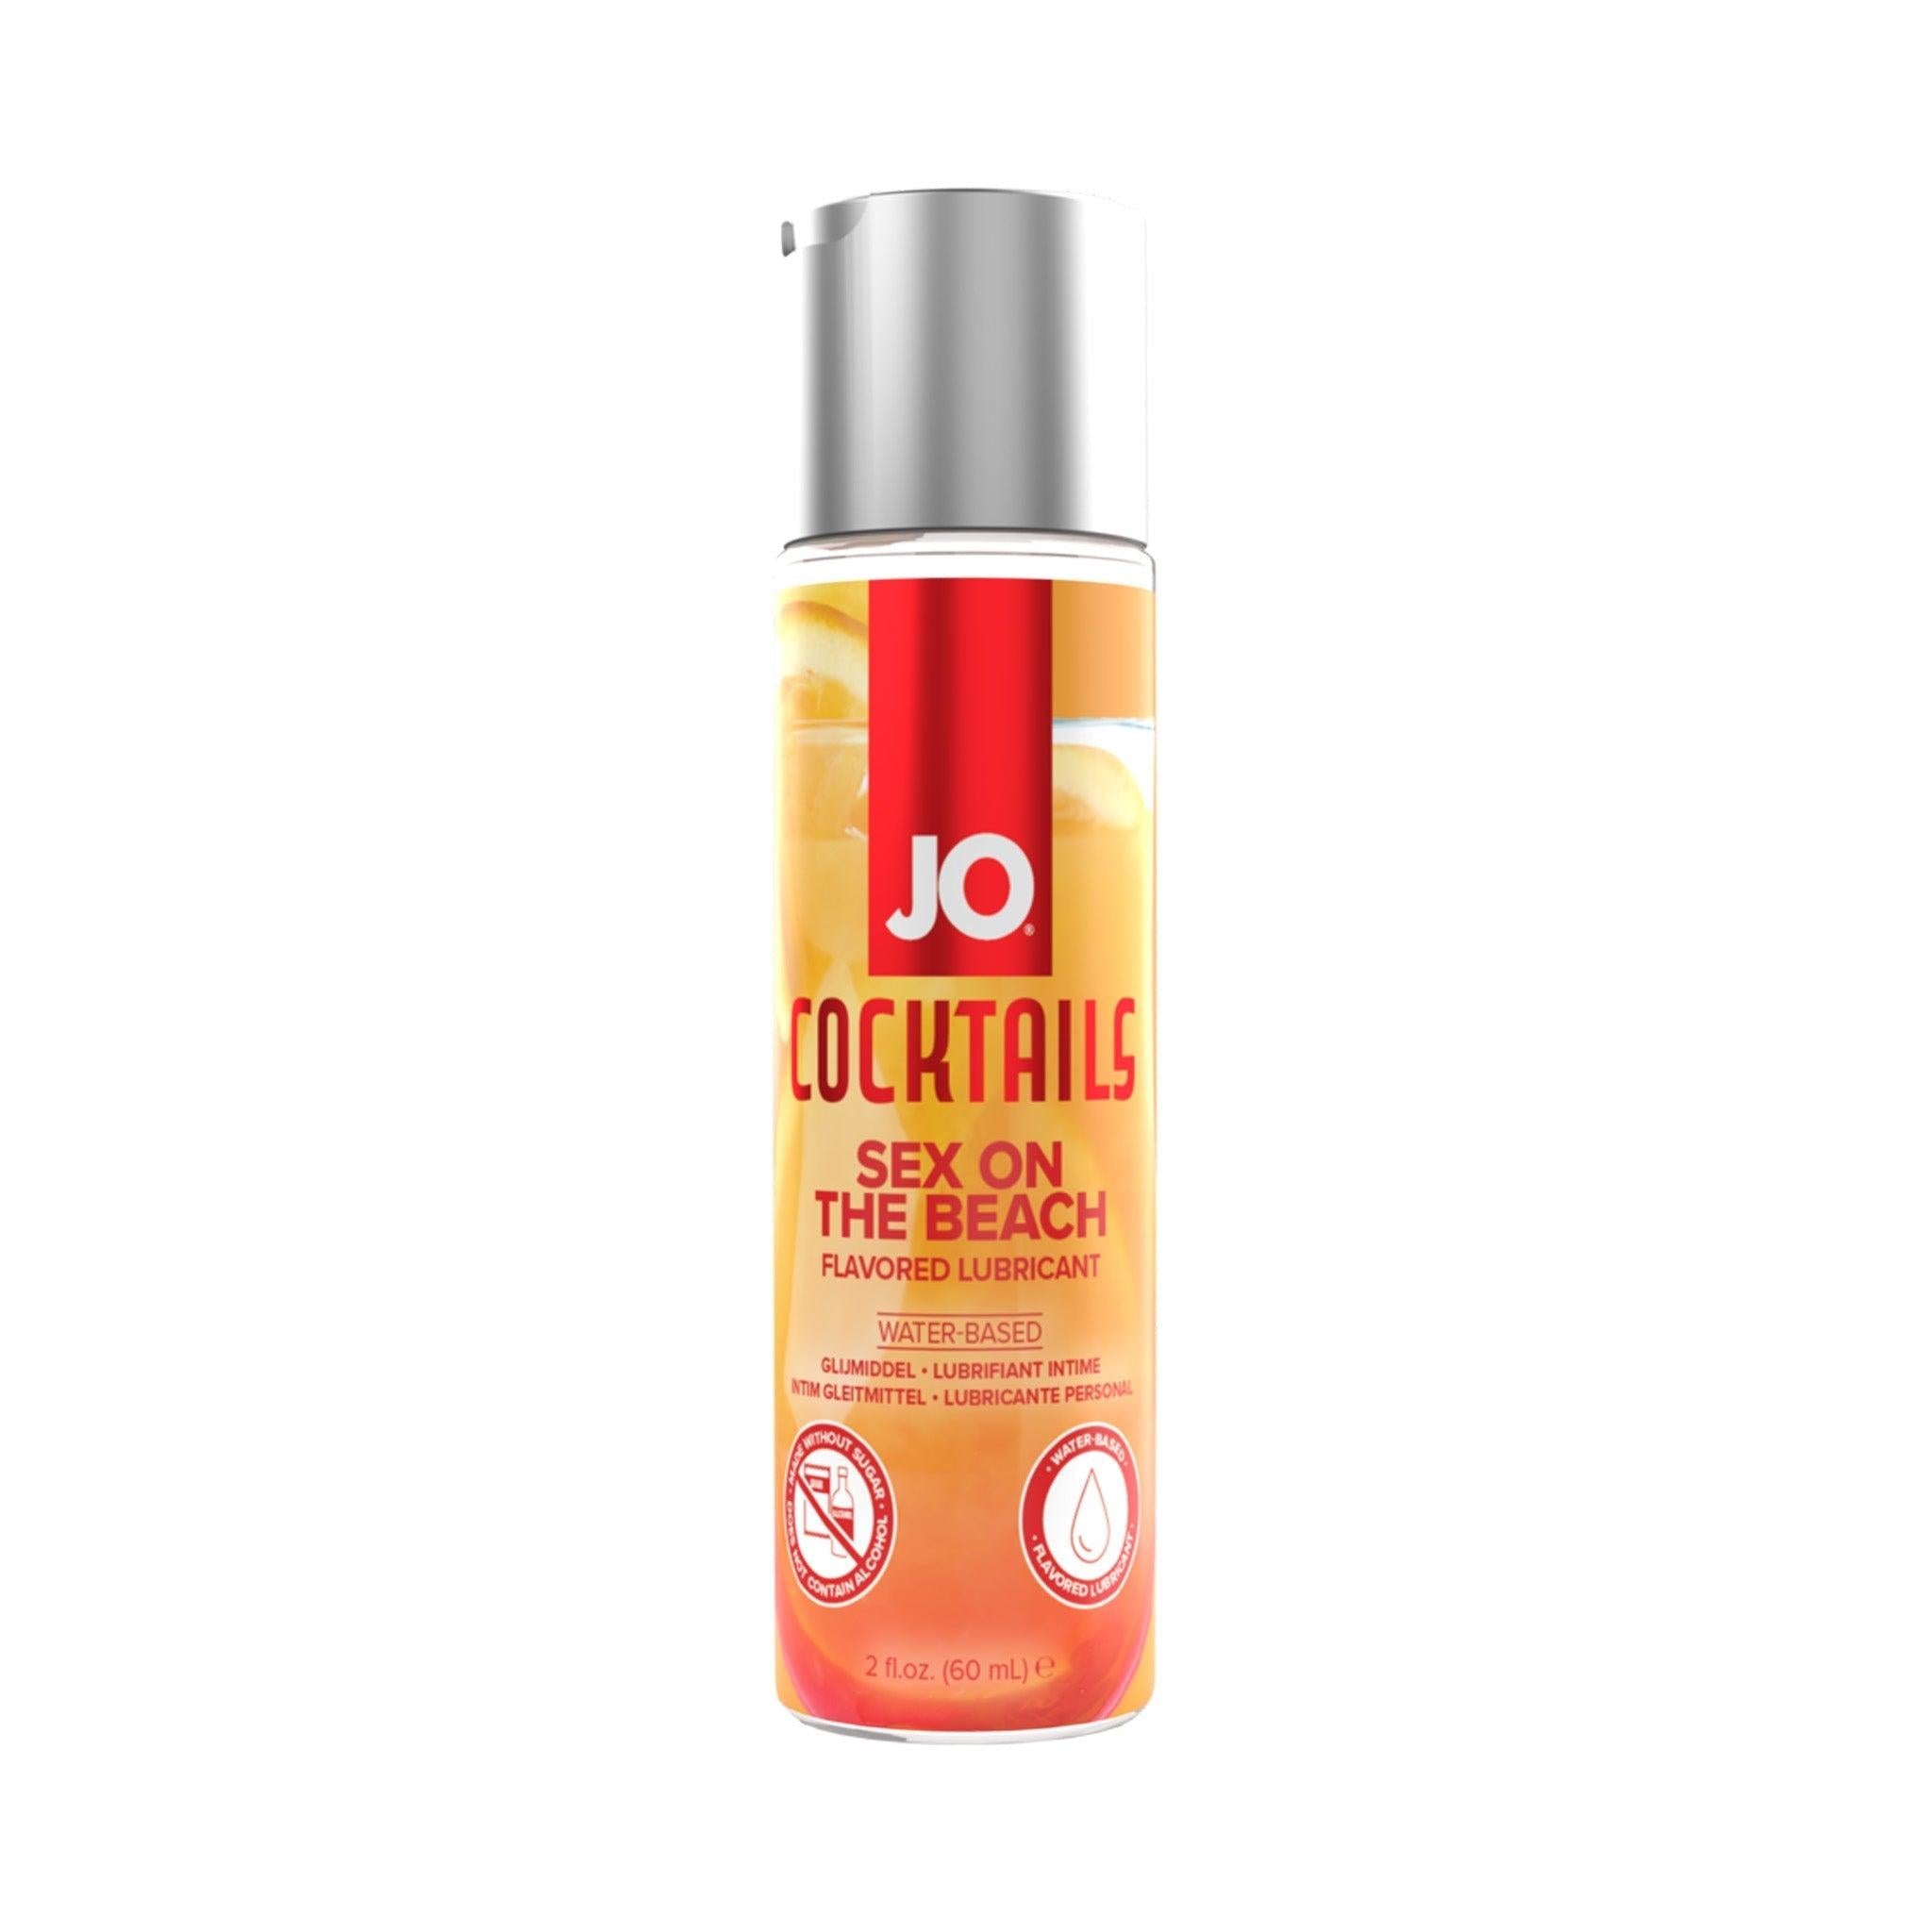 JO Cocktails Water-Based Flavored Lubricant 2 oz (60 mL) - 6 Flavors! - CheapLubes.com